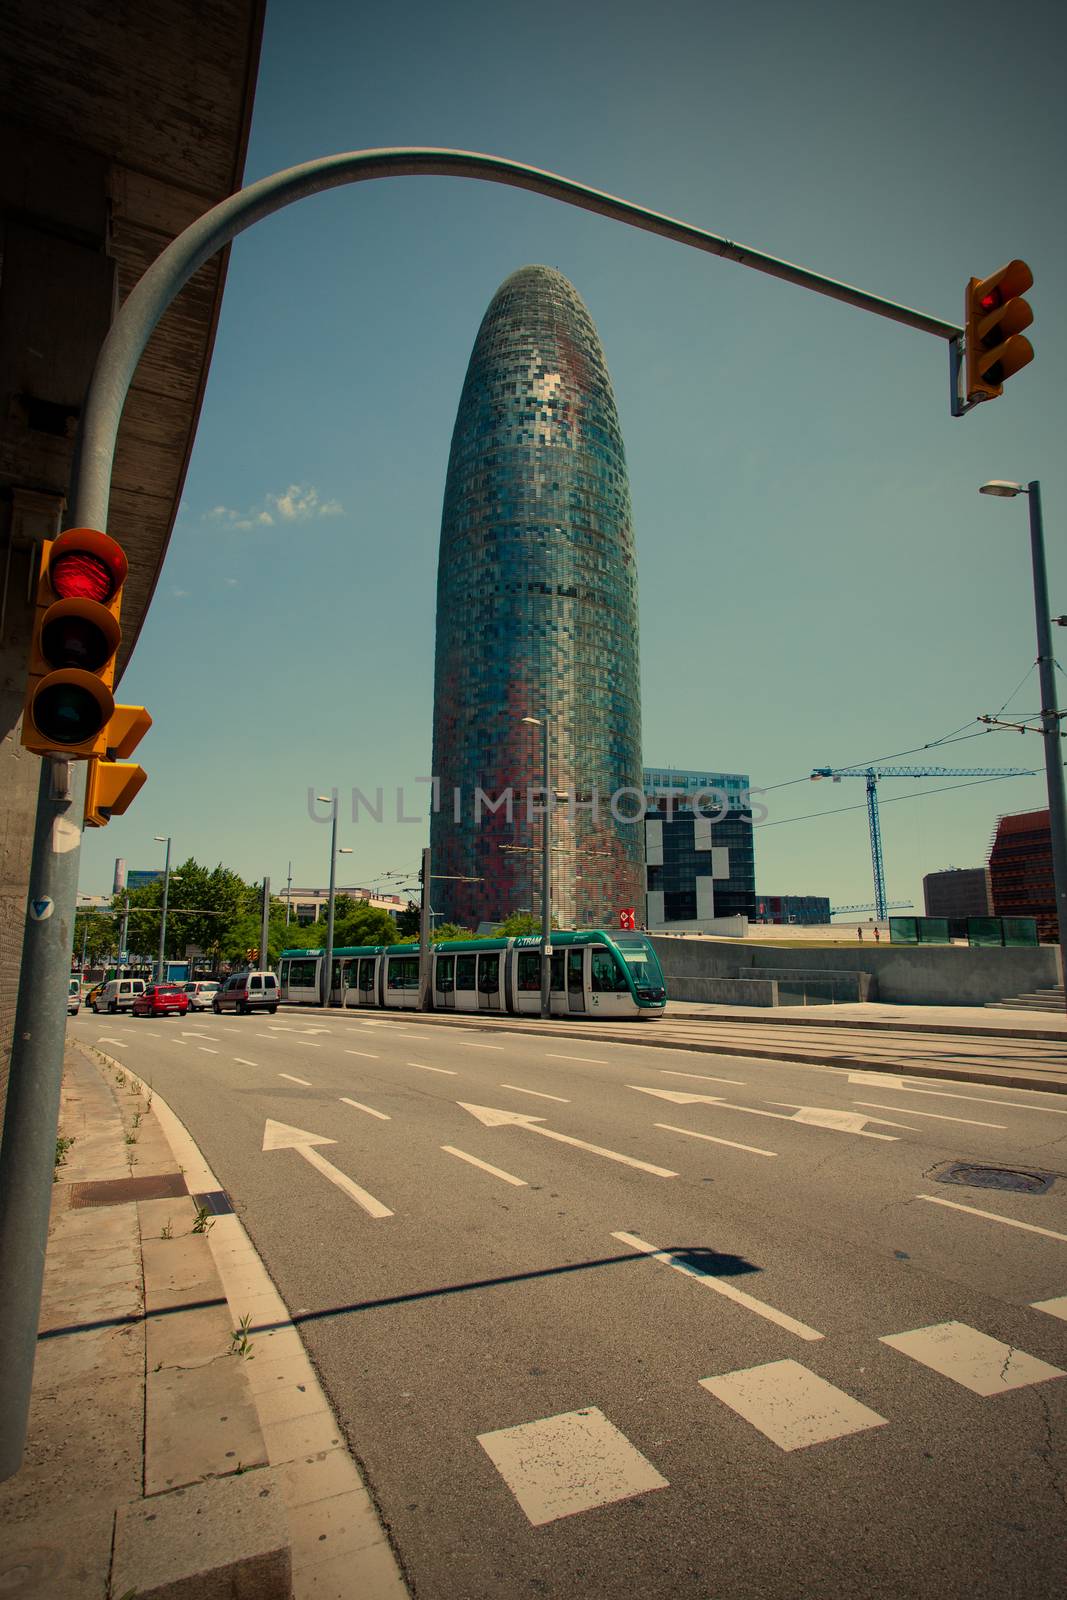 Spain, Catalunya, Barcelona 14.06.2013, the city's landscape by Astroid